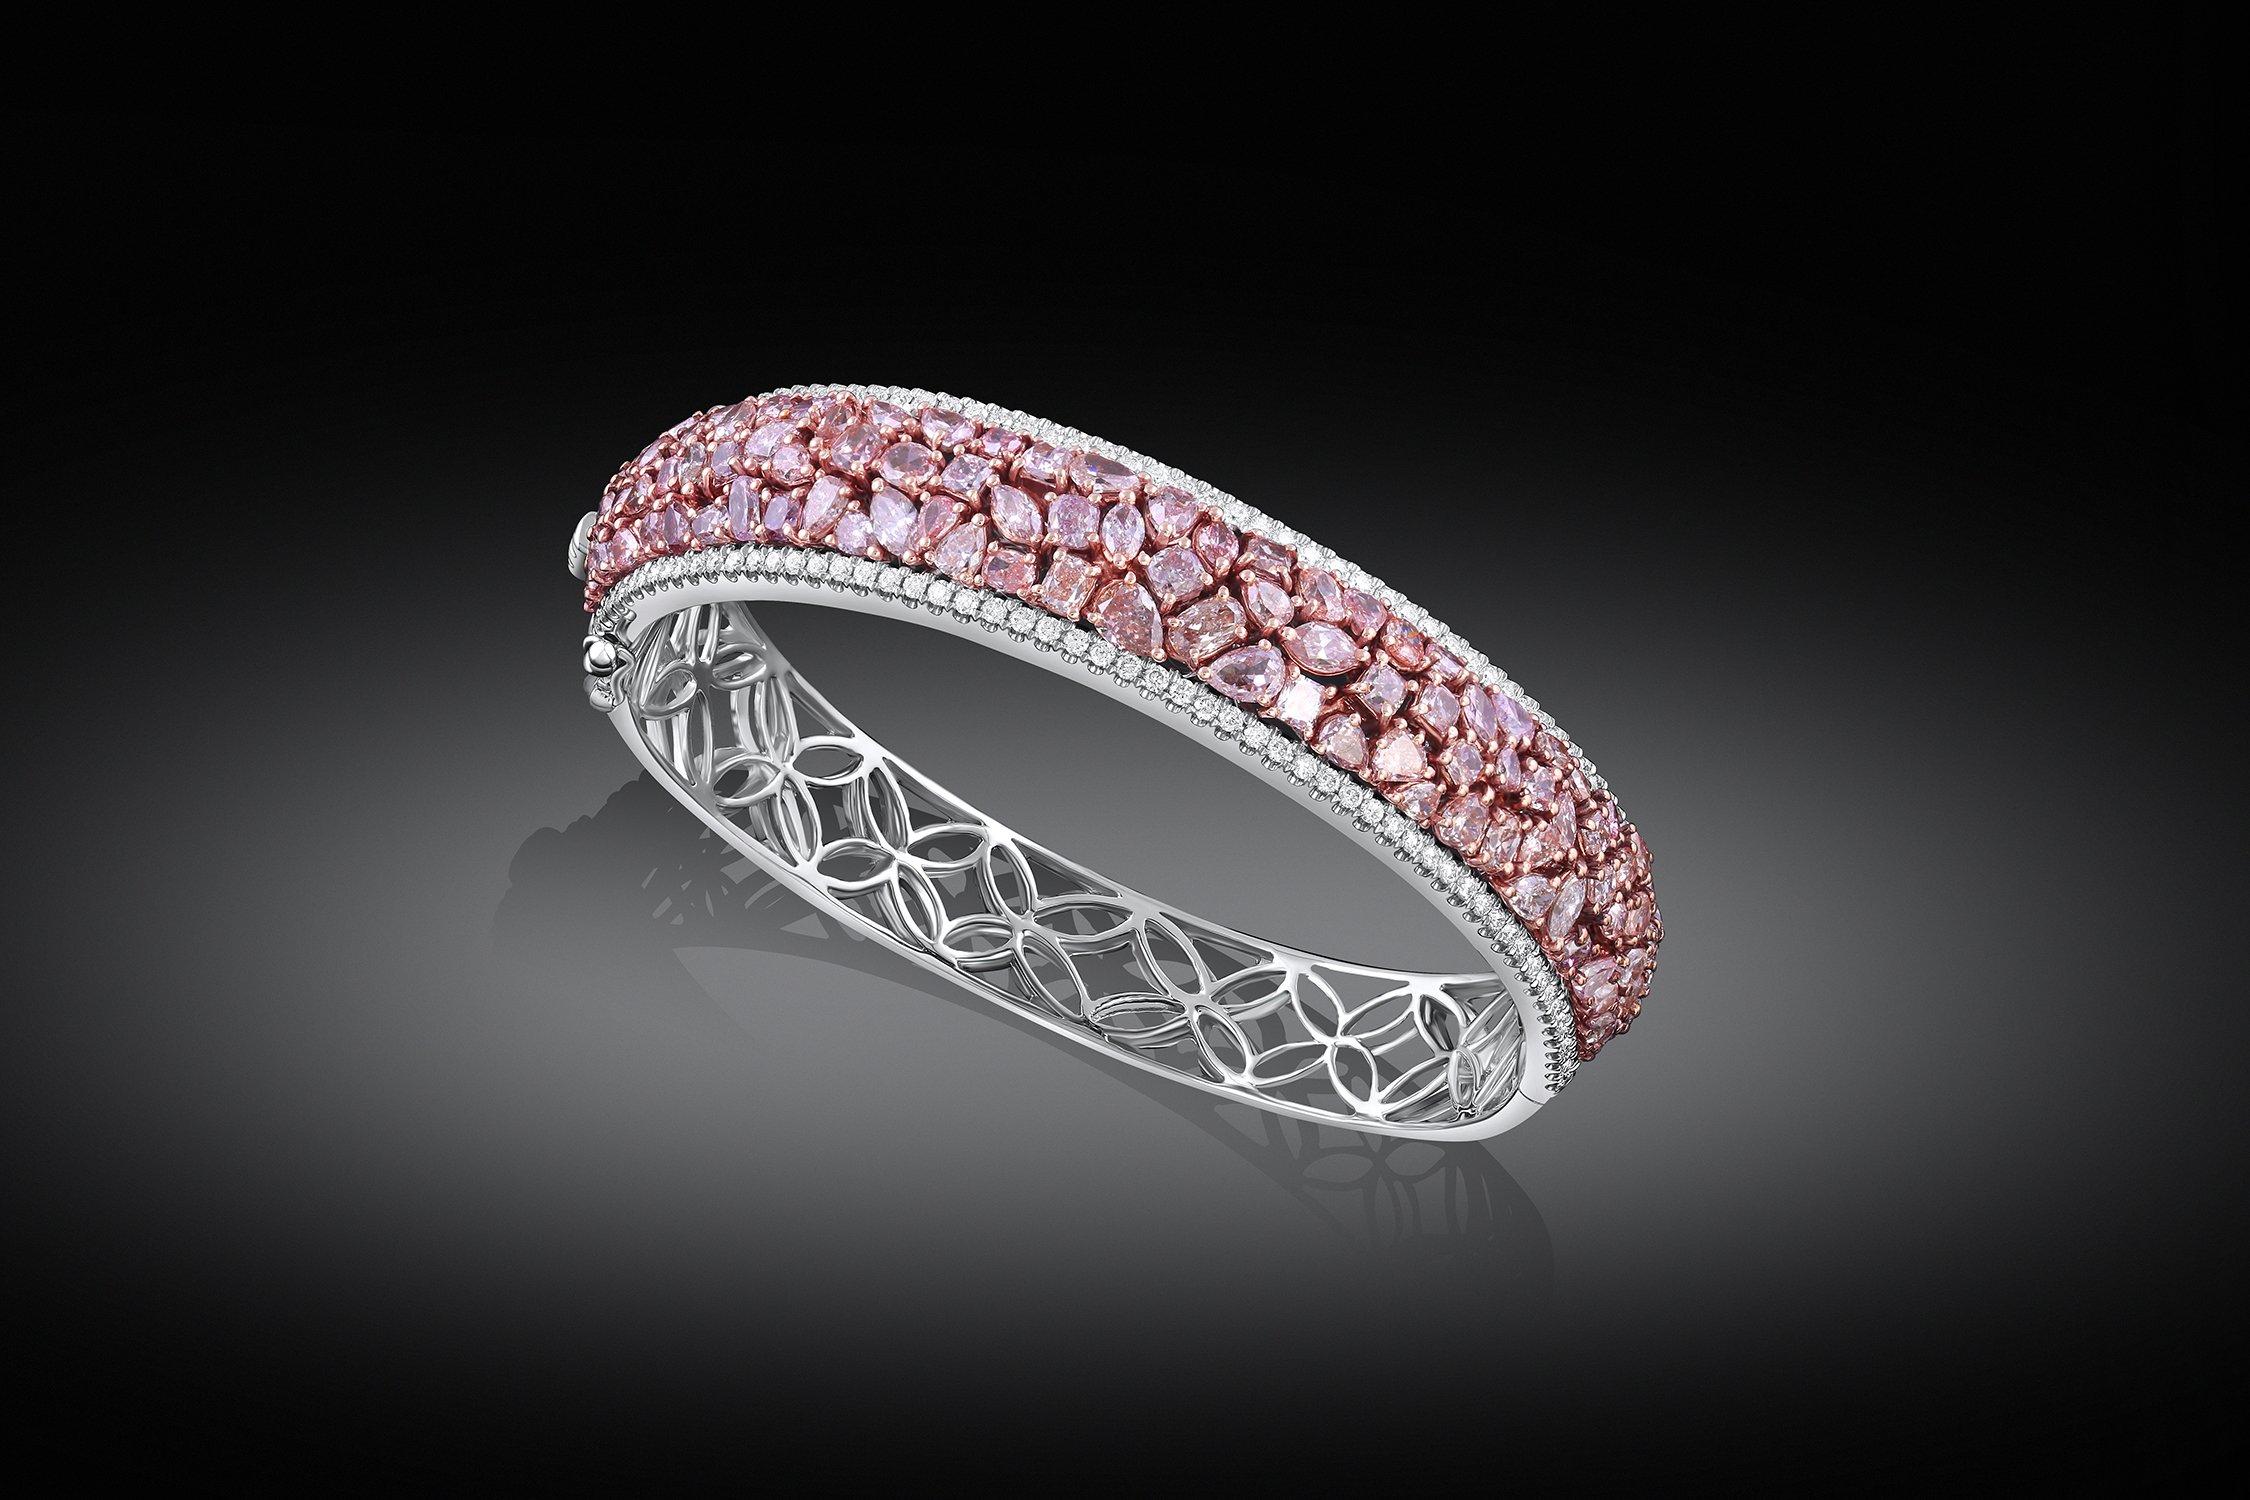 Pink Diamond Bangle. Natural colored fancy light pink to fancy pink multi-shape diamonds weighing 9.47cttw and colorless diamonds weighing 1.45cttw, set in an 18k white and pink gold bangle. GIA-certified.